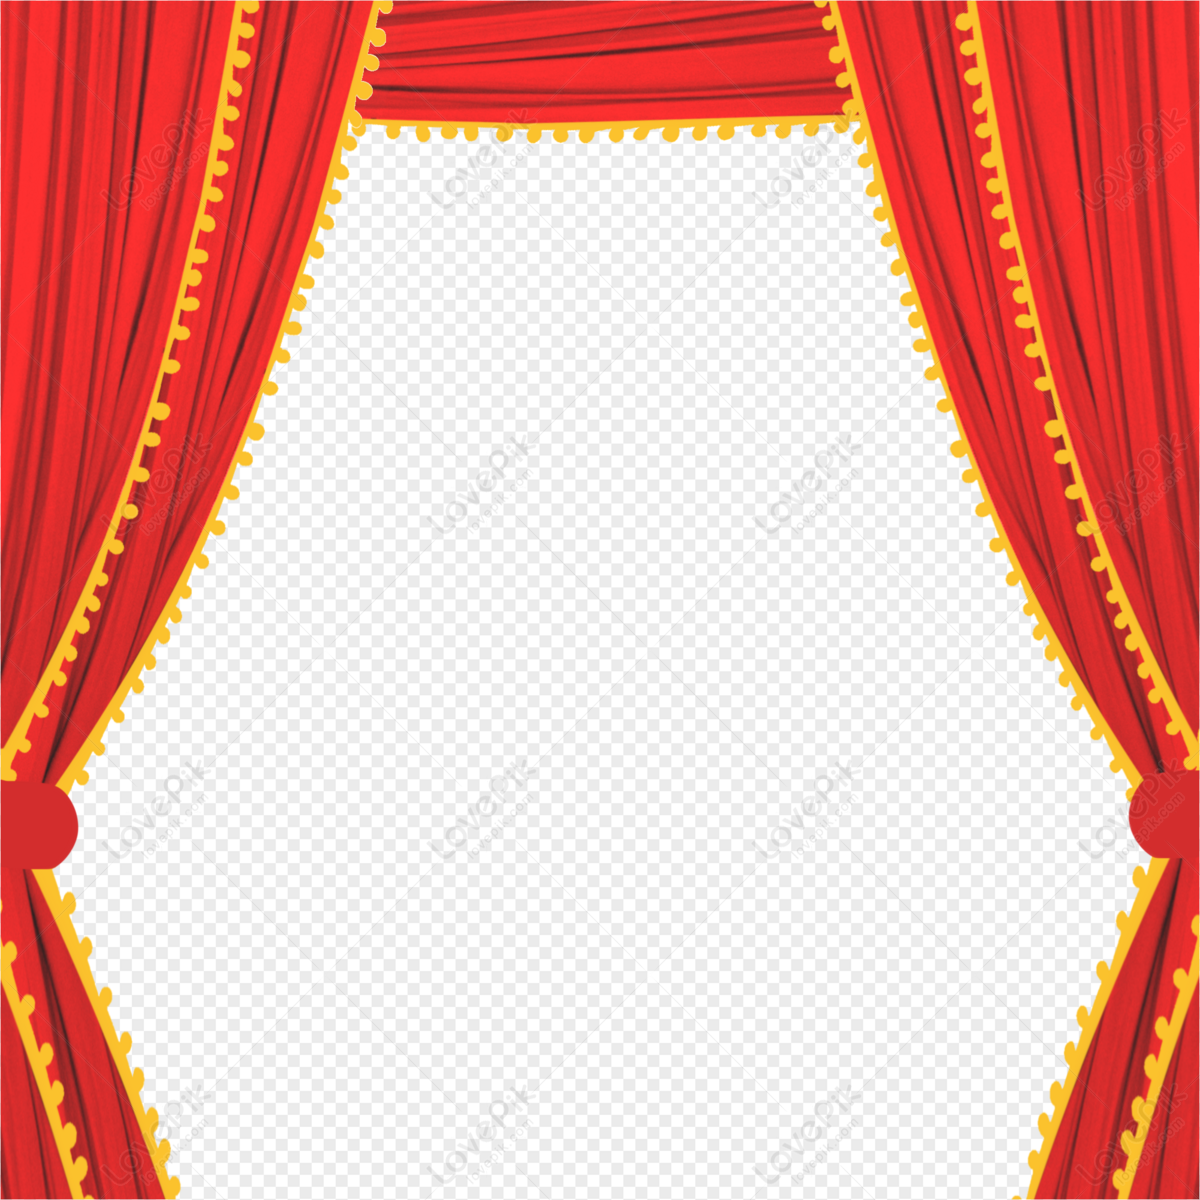 Hand Painted Red Chinese Style Stage Curtain PNG Transparent Image ...